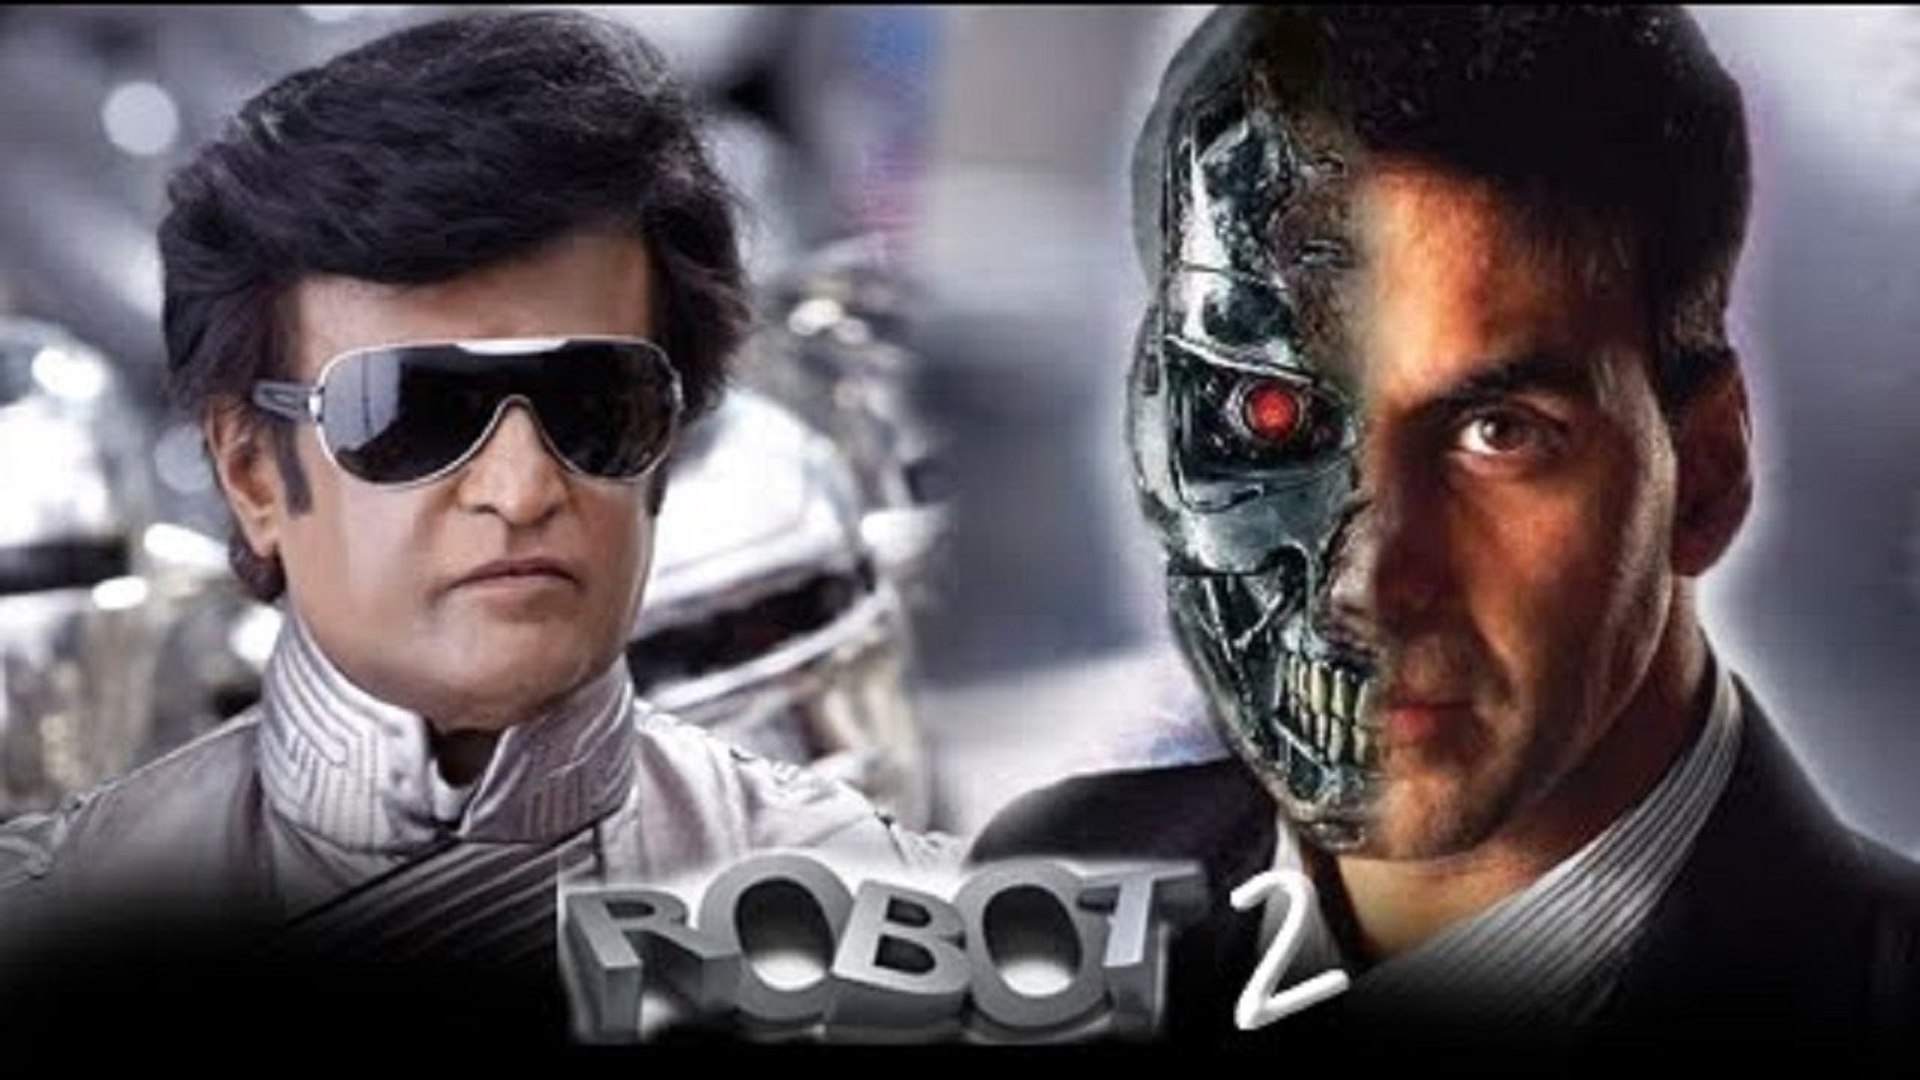 Robot 2 Trailer First Look | Rajnikanth New Movie Akshay Kumar | Indian New  Movie Trailers Fanmade | Dailtmotion Robot - video Dailymotion